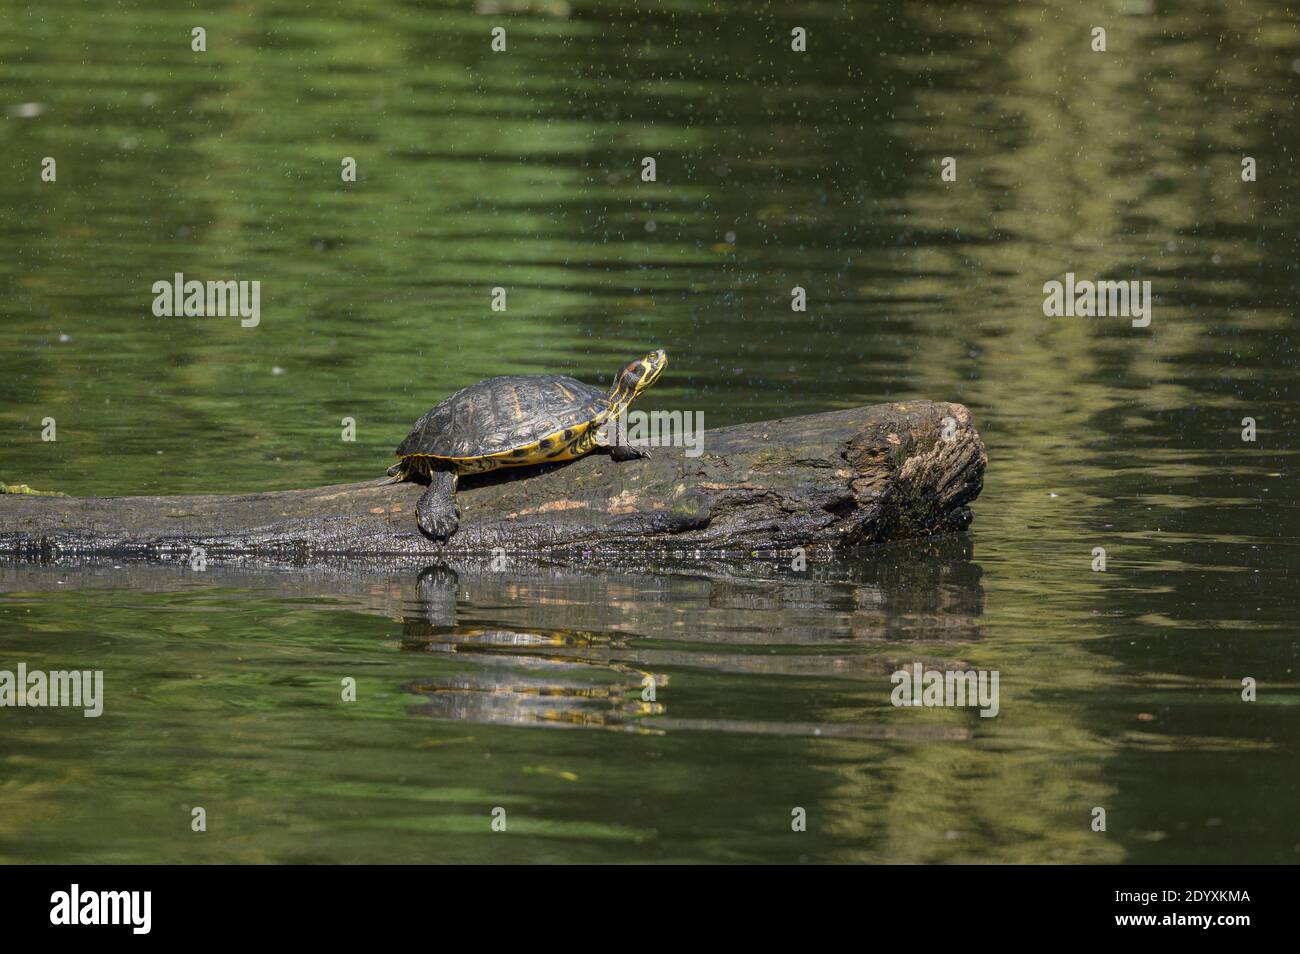 Red-eared terrapin  (Trachemys scripta elegans), Reddish Vale Country Park, Greater Manchester Stock Photo